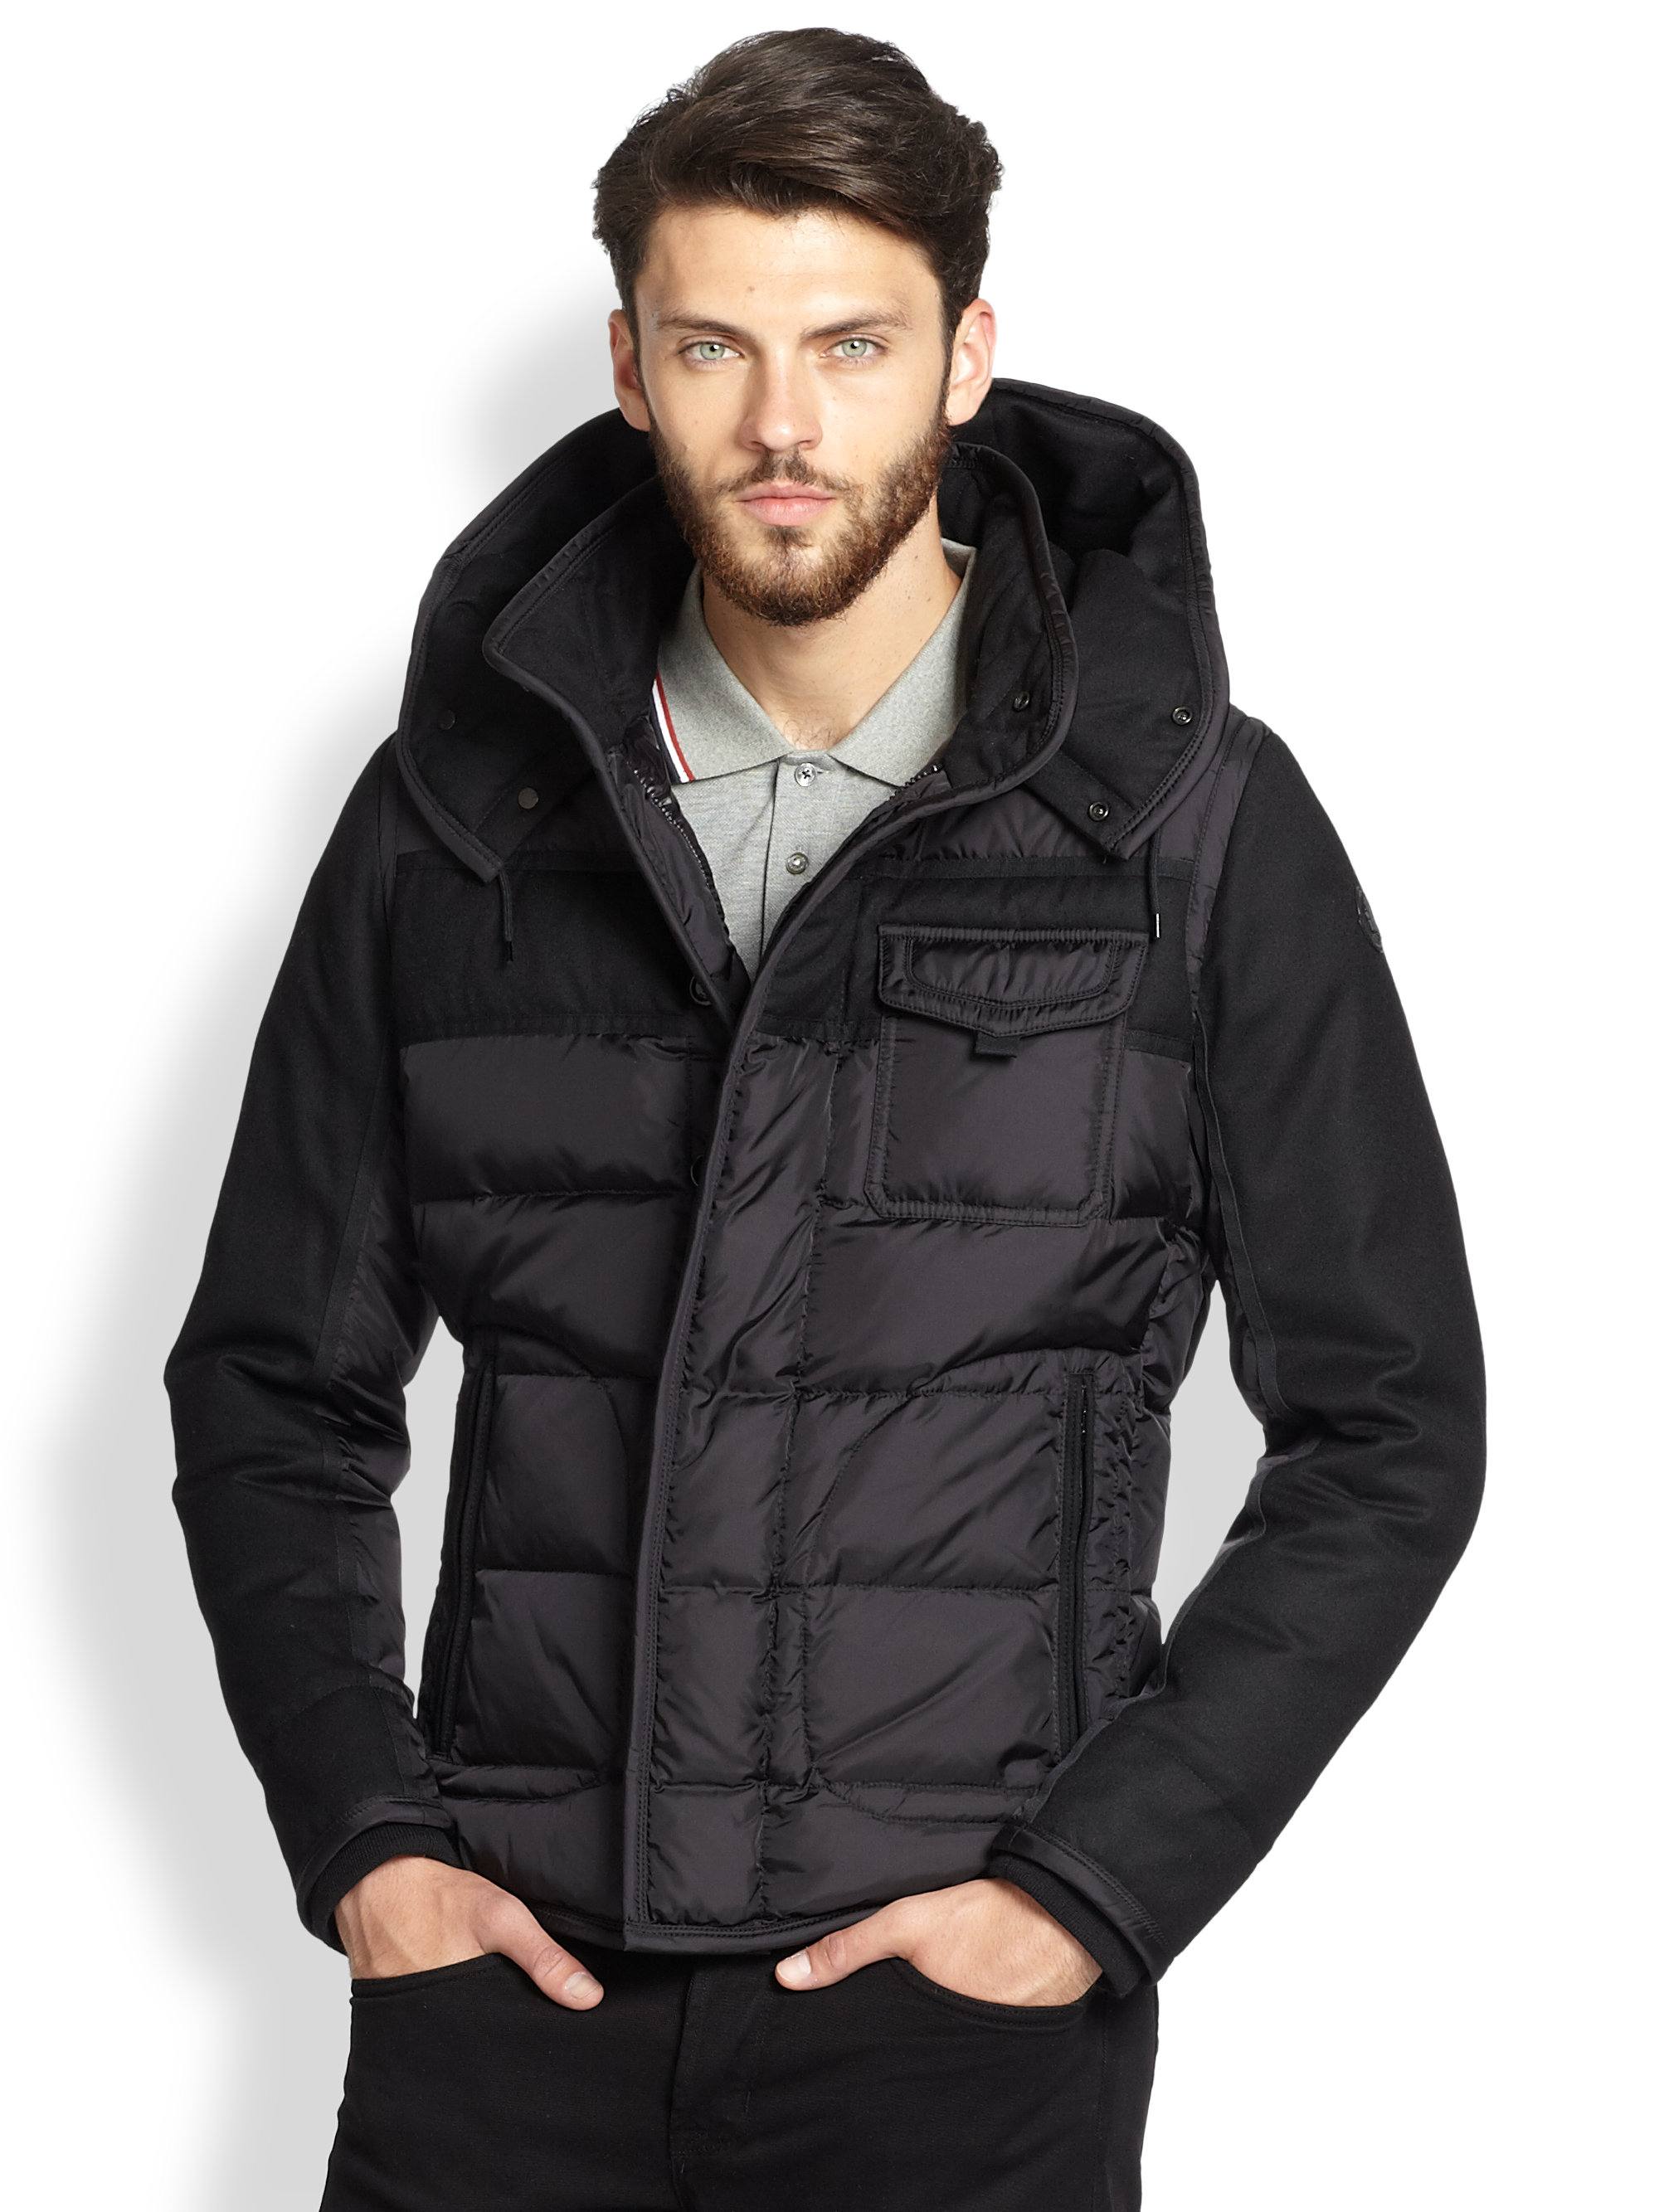 Moncler Ryan Jacket Clearance, 59% OFF | www.mooving.com.uy